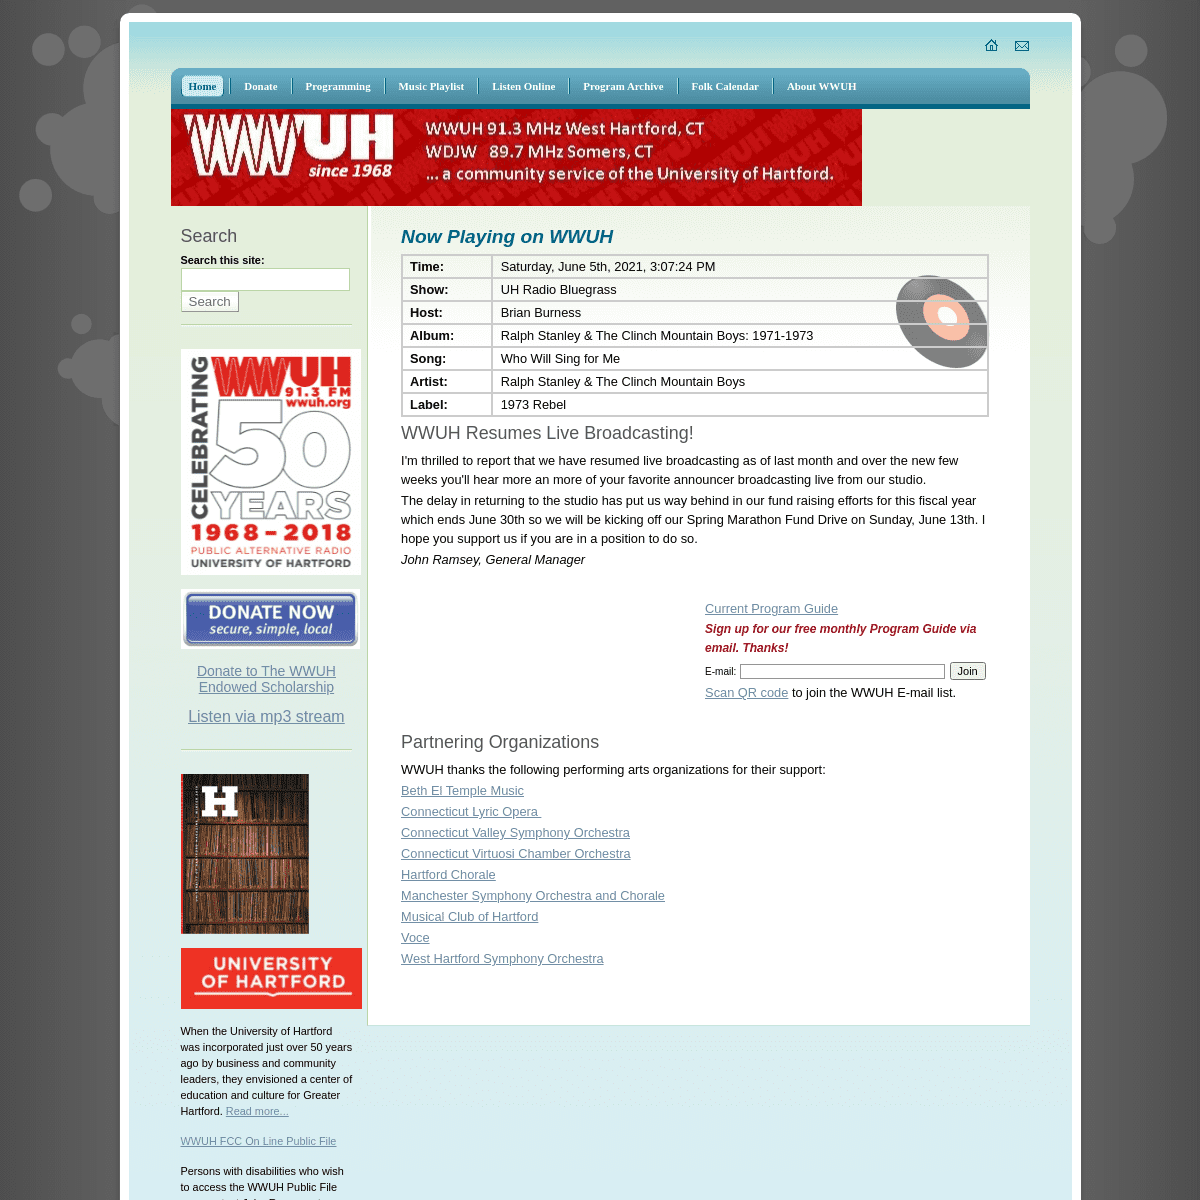 A complete backup of https://wwuh.org